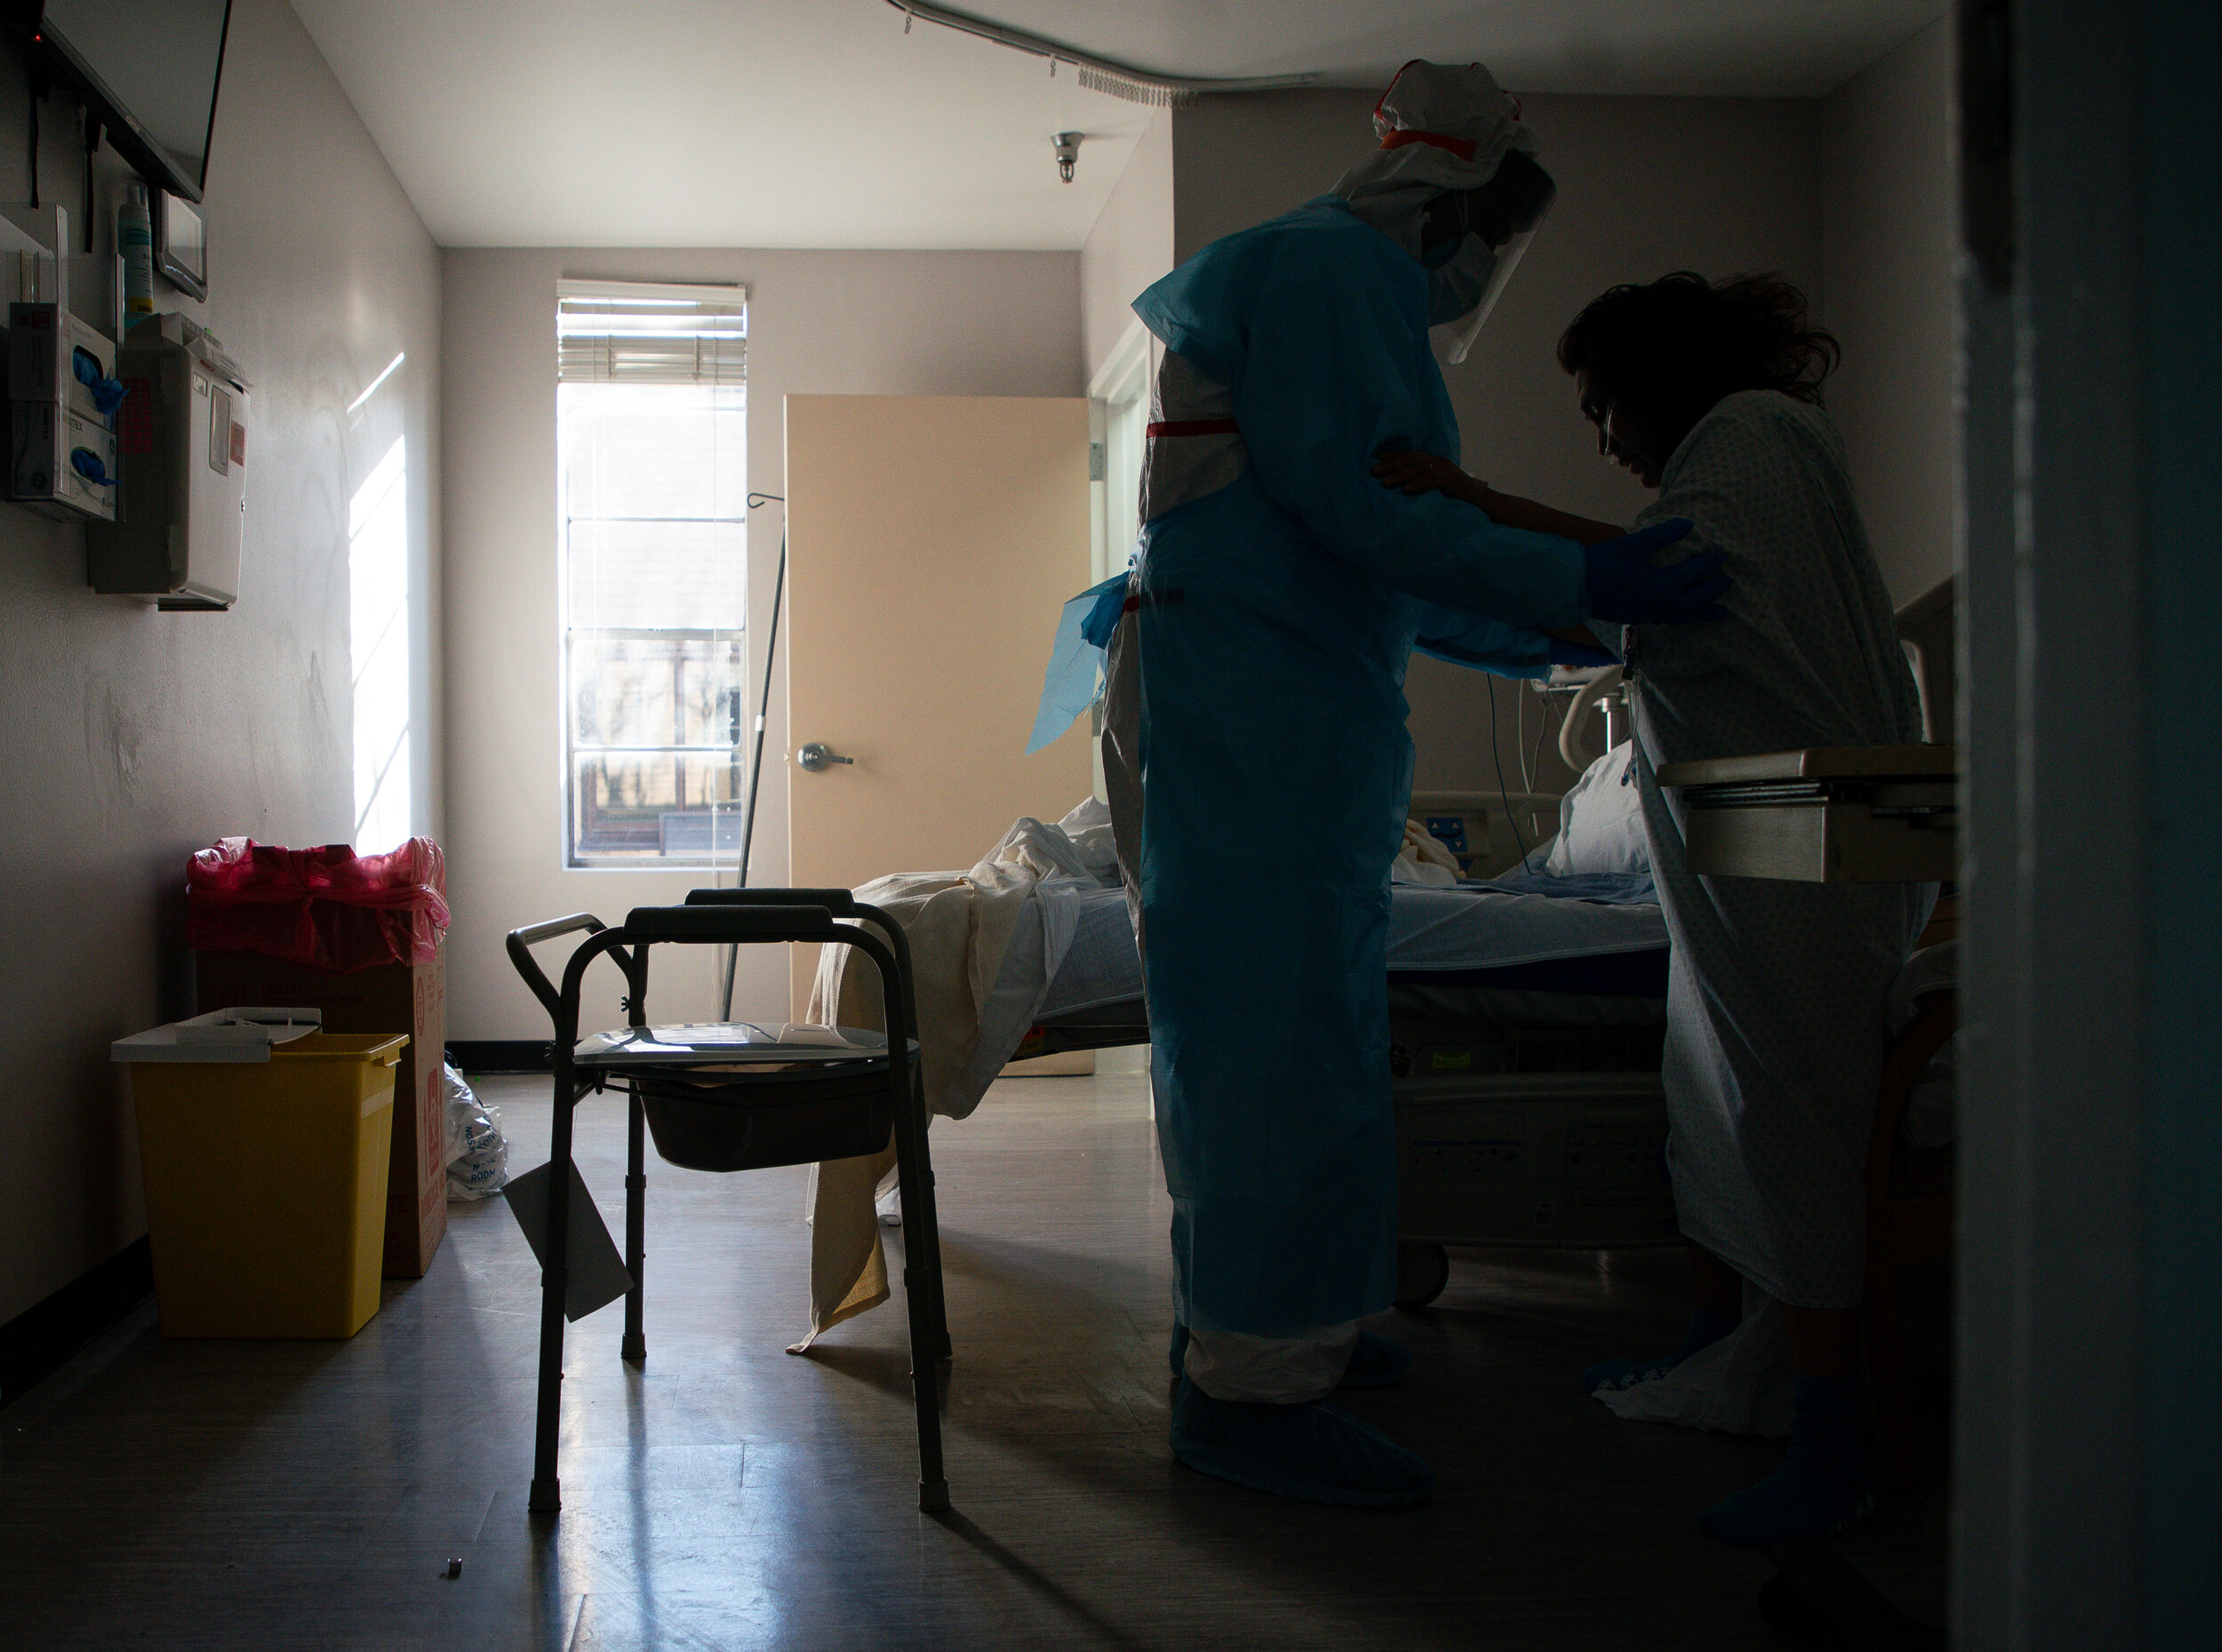  A nurse helps a patient walk, after they had been bed-ridden inside the COVID-19 intensive care unit at United Memorial Medical Center on Thursday, Dec. 24, 2020, in Houston.  